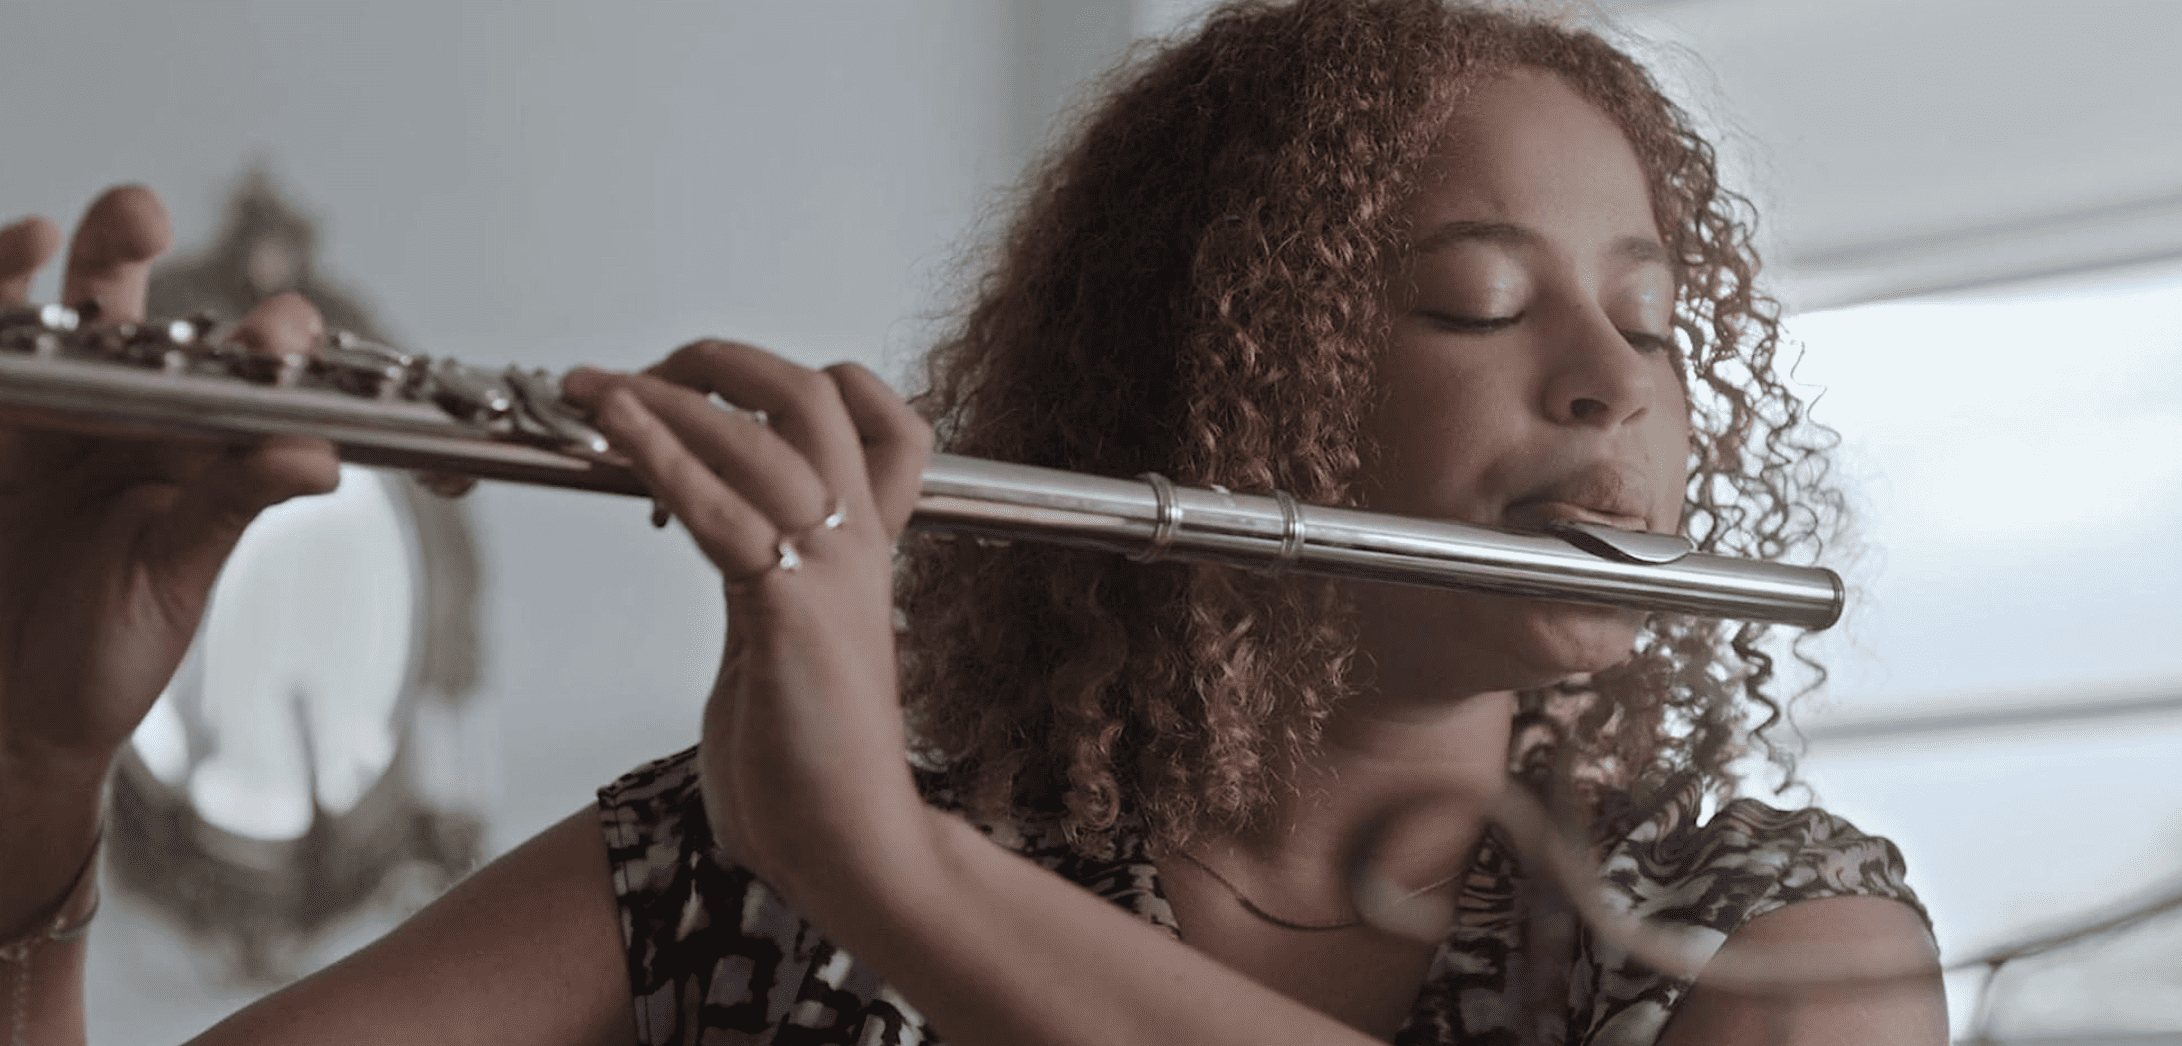 Caroline Watters playing the flute in this image from Apatow Productions